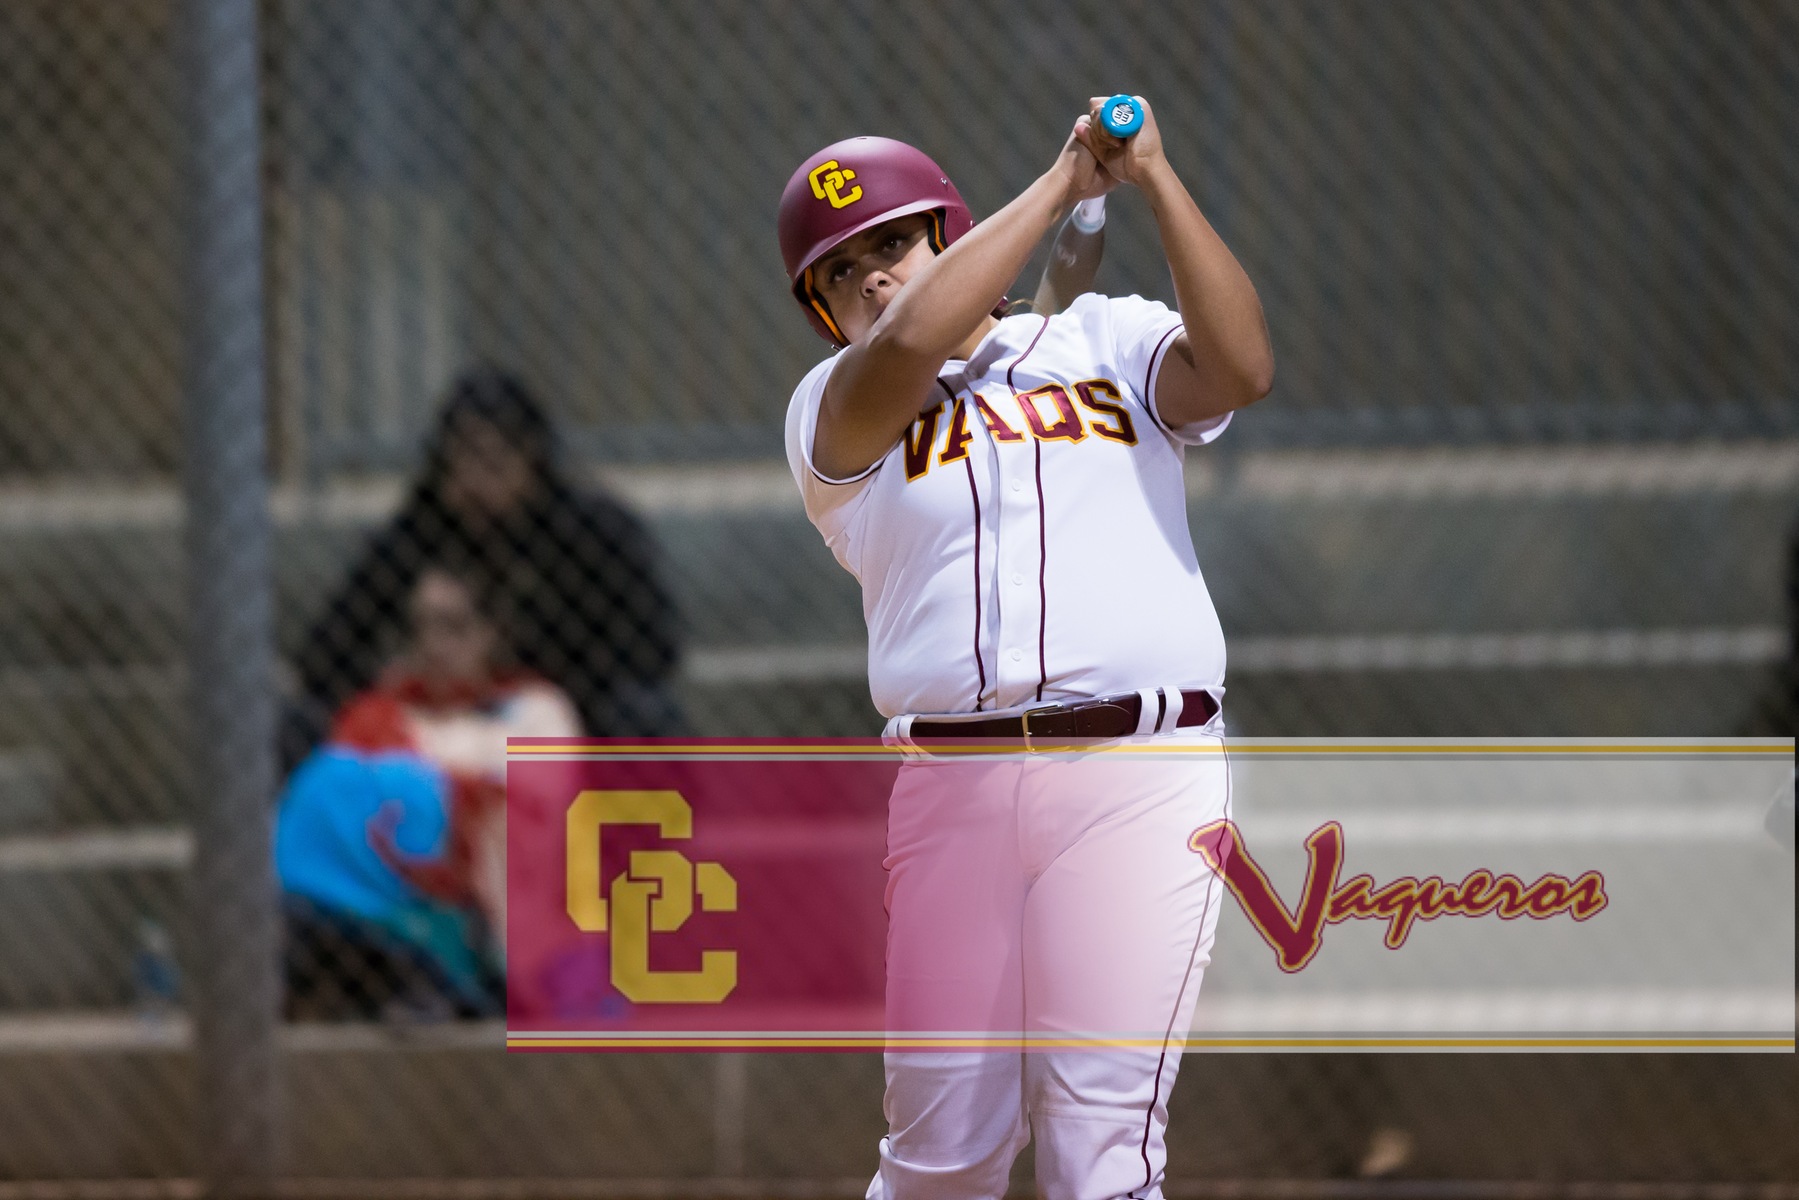 Madison Stillwell Homer’s again but Lady Vaqs fall 14-1 to Cerritos.